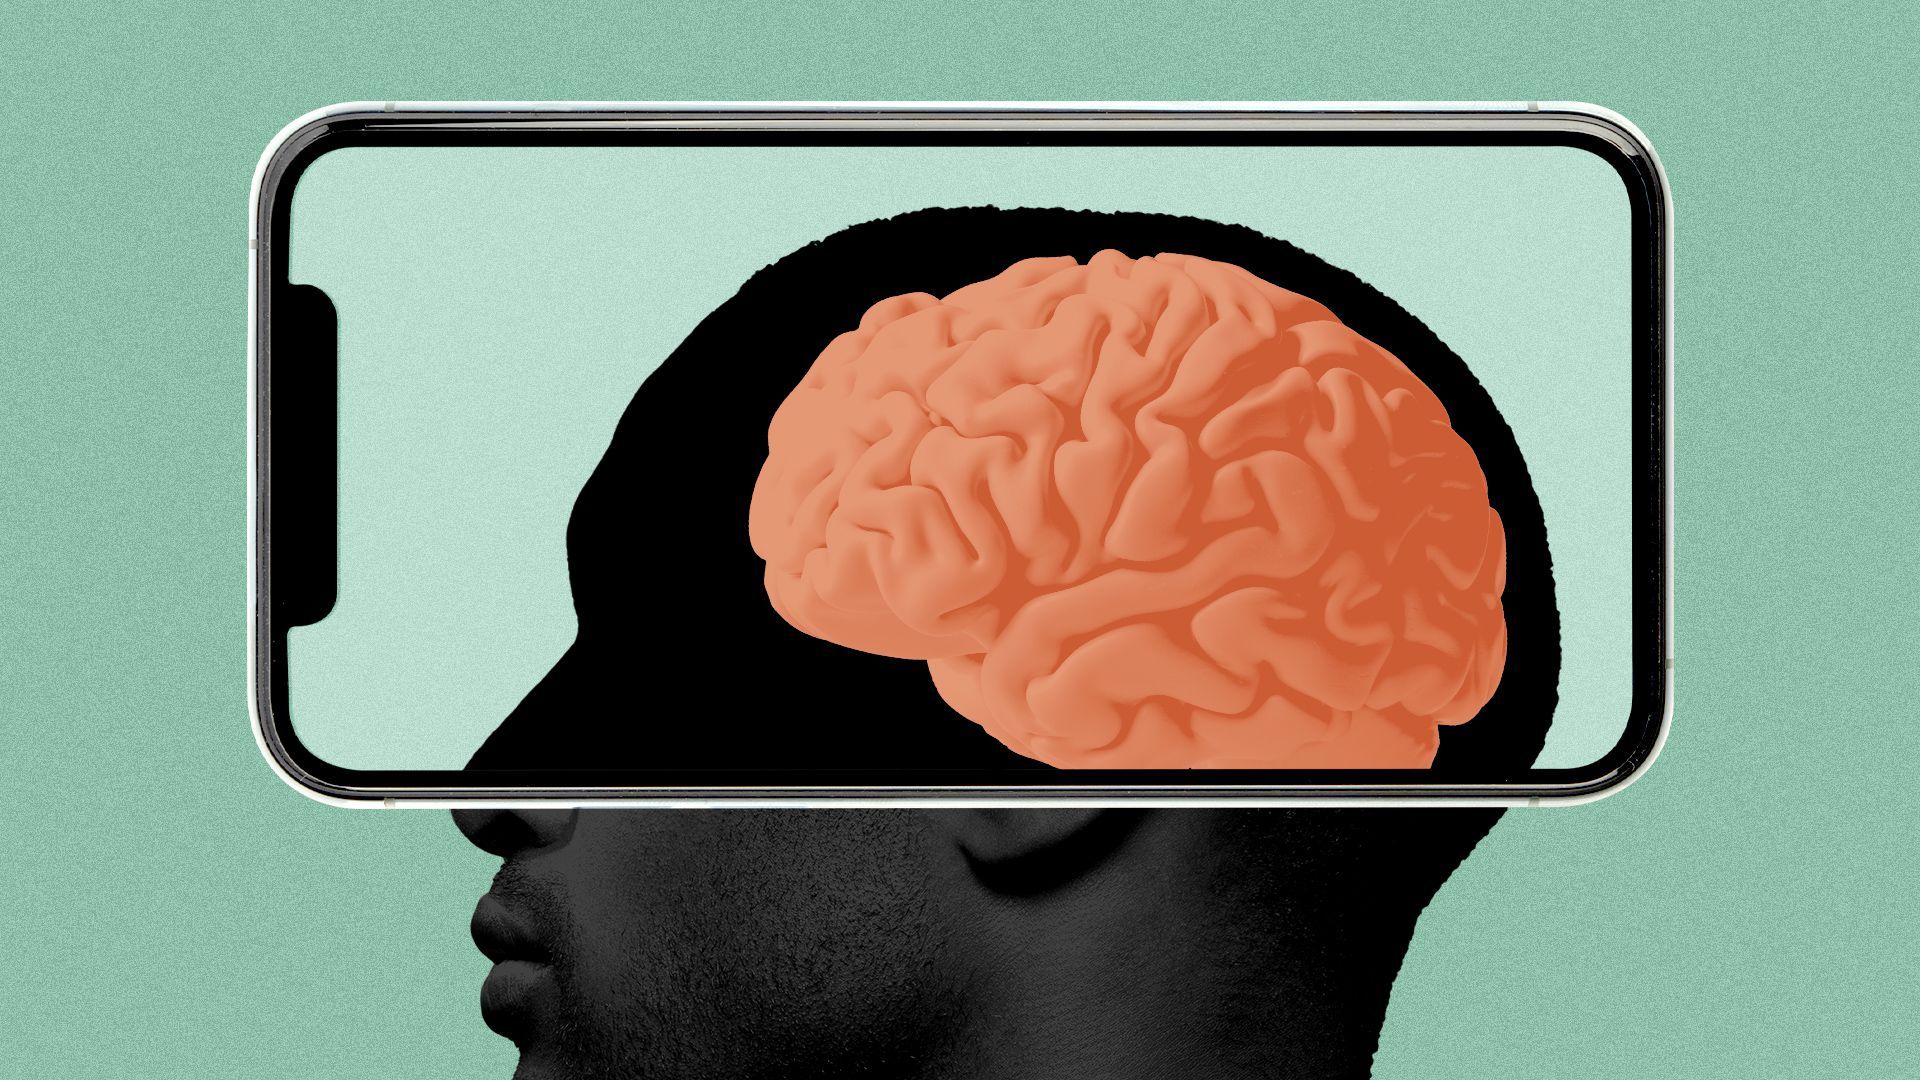 Illustration of a man in profile with a phone over the top half of his head revealing a view of his brain.